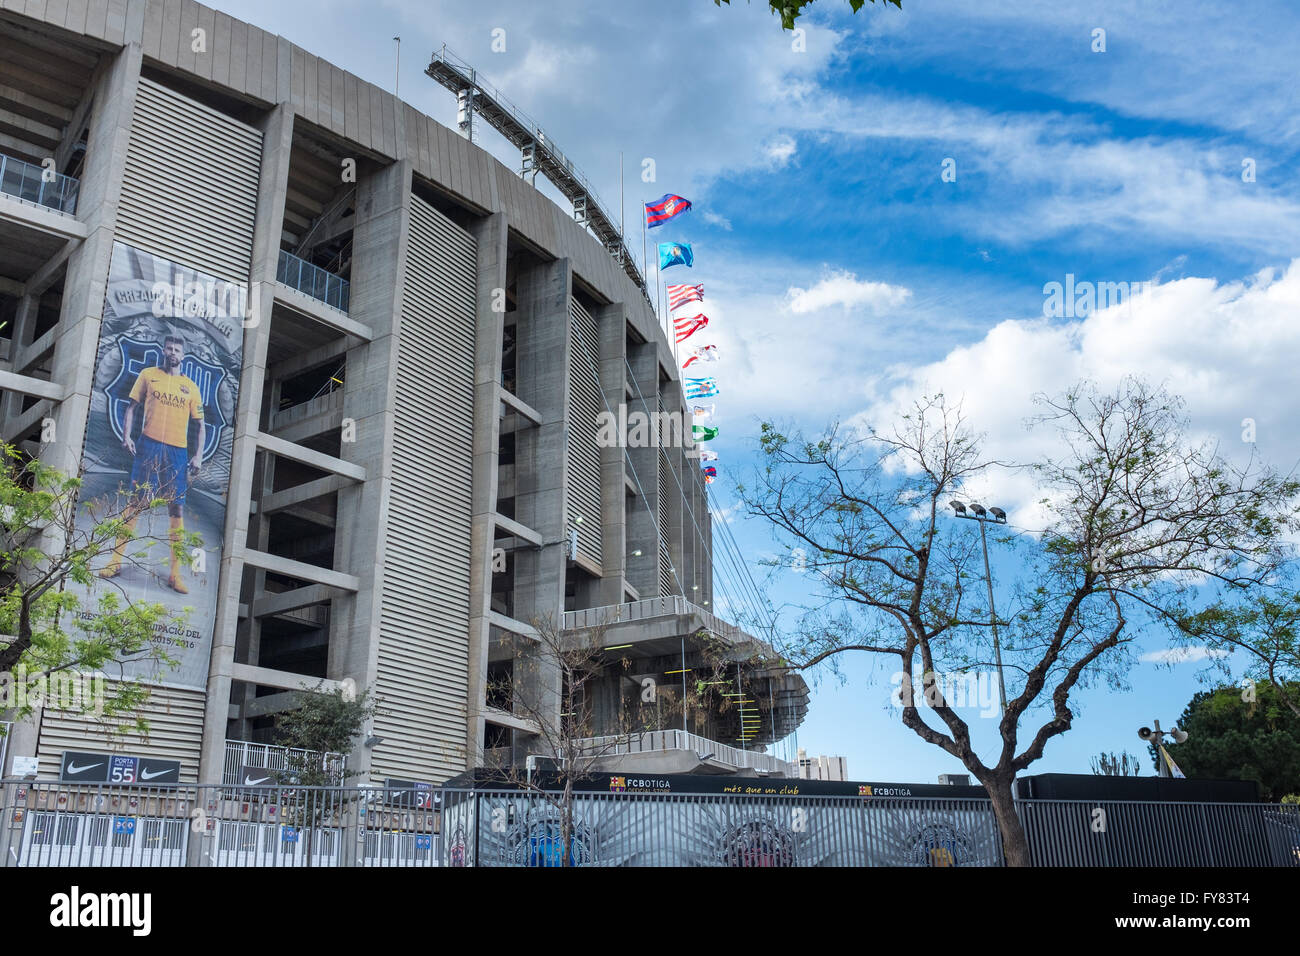 Outside the Camp Nou football stadium in Barcelona Stock Photo